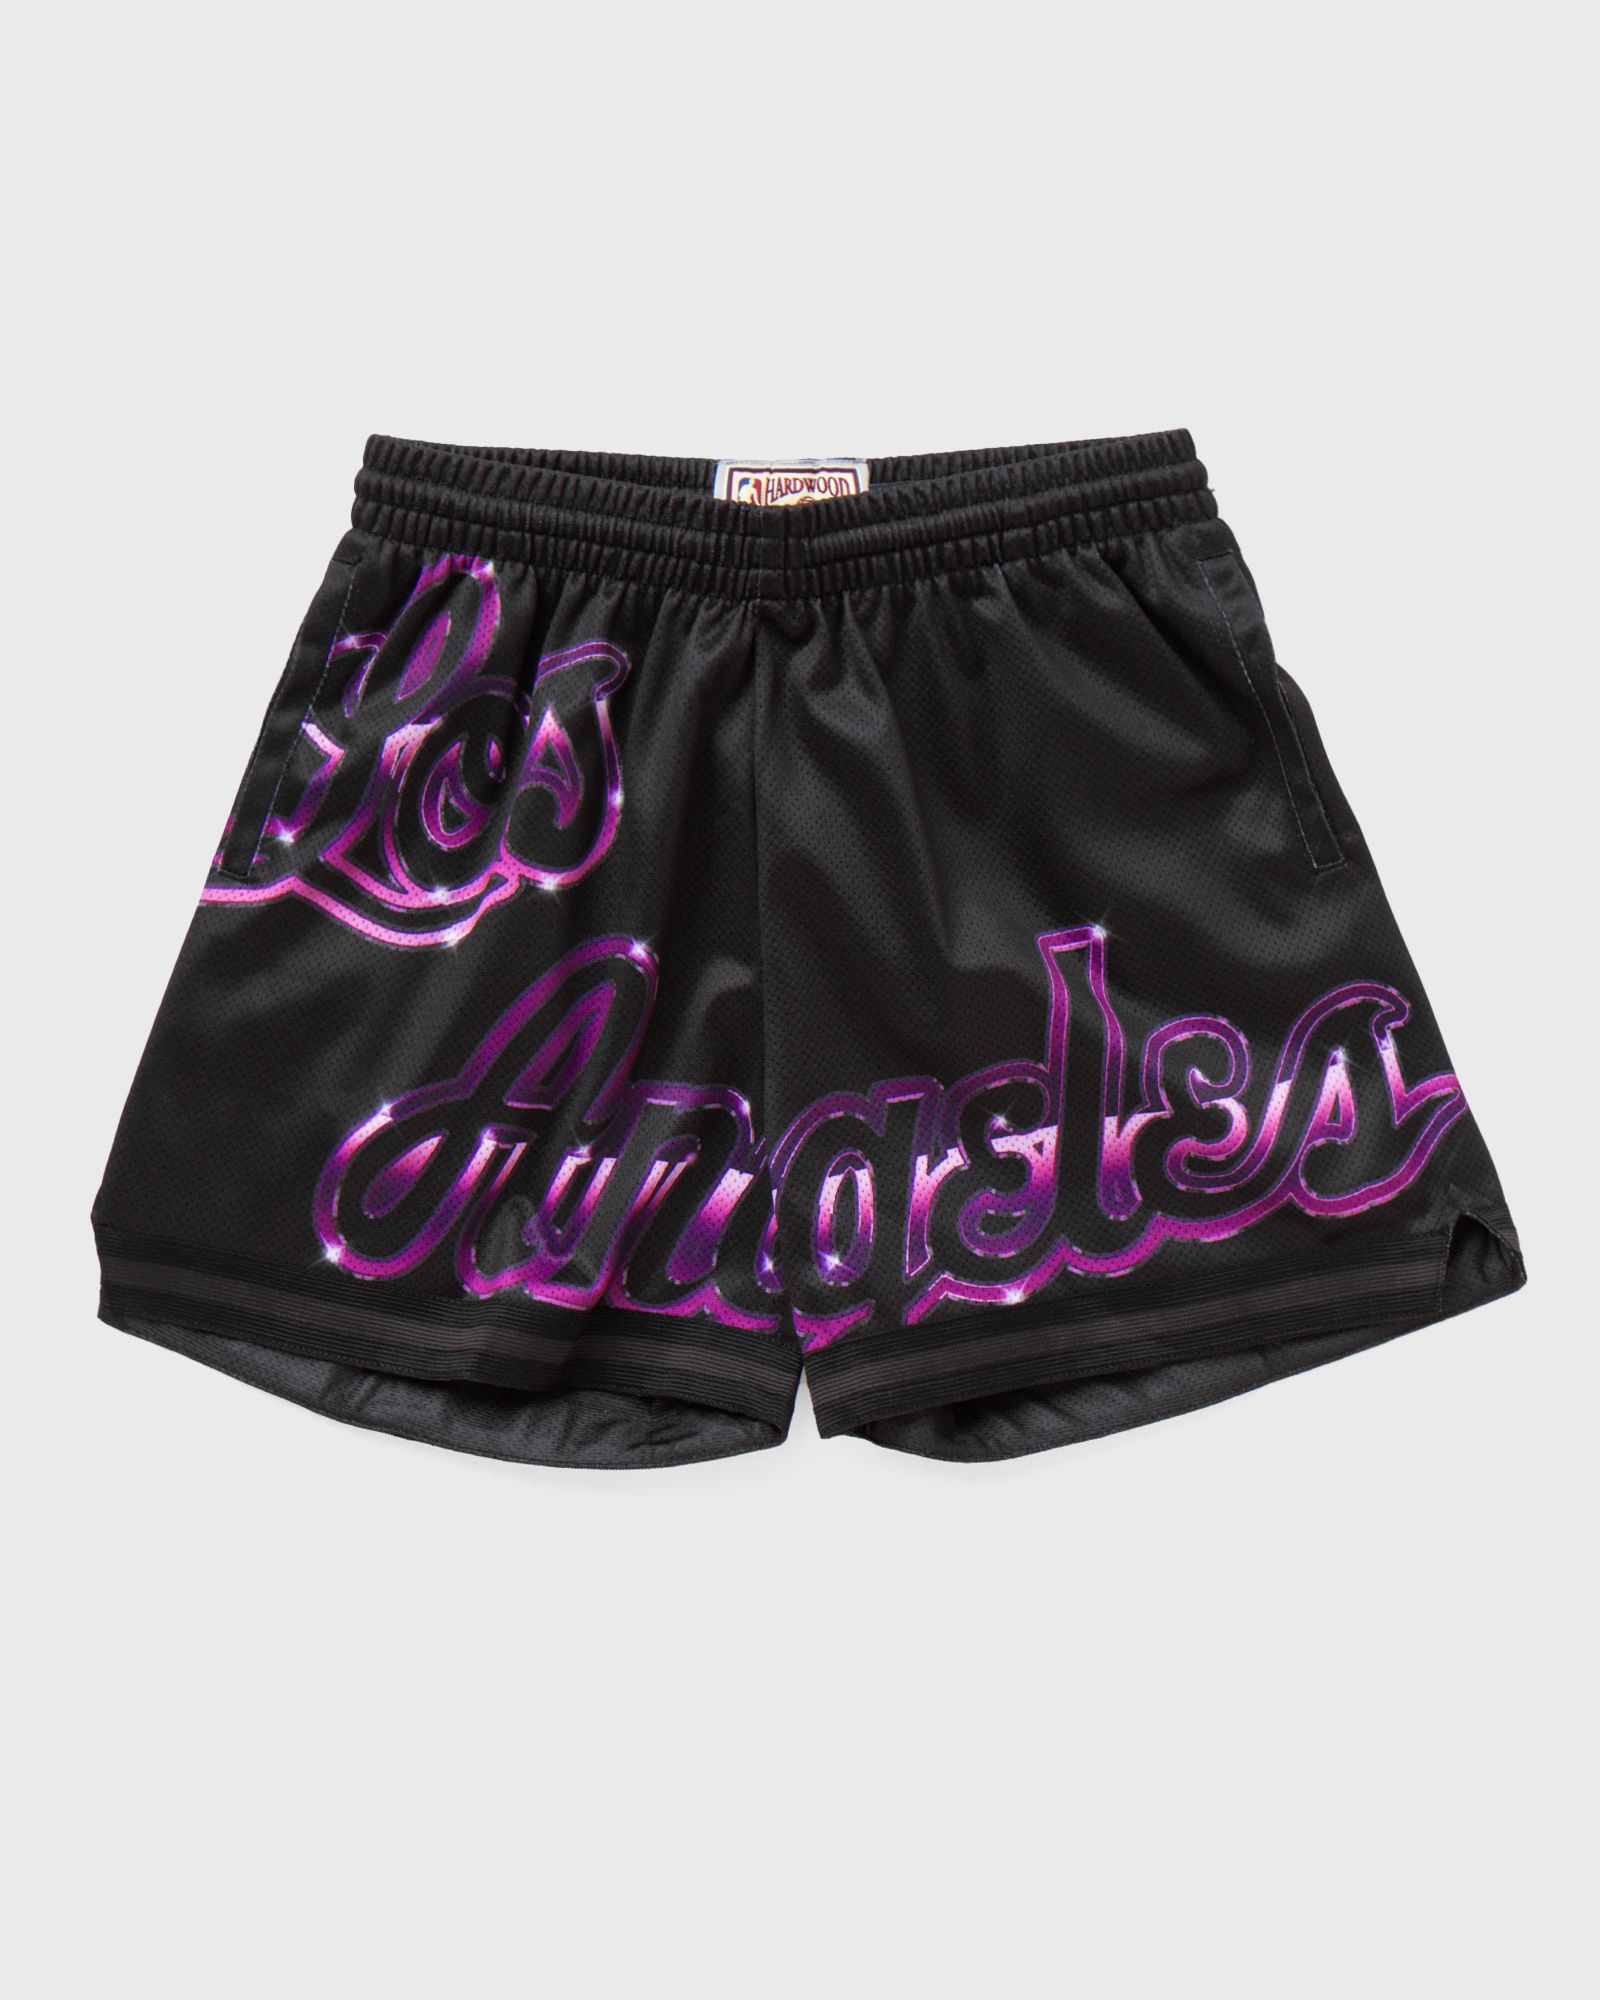 Mitchell & Ness - wmns big face 4.0 shorts los angeles lakers women sport & team shorts black in größe:xs